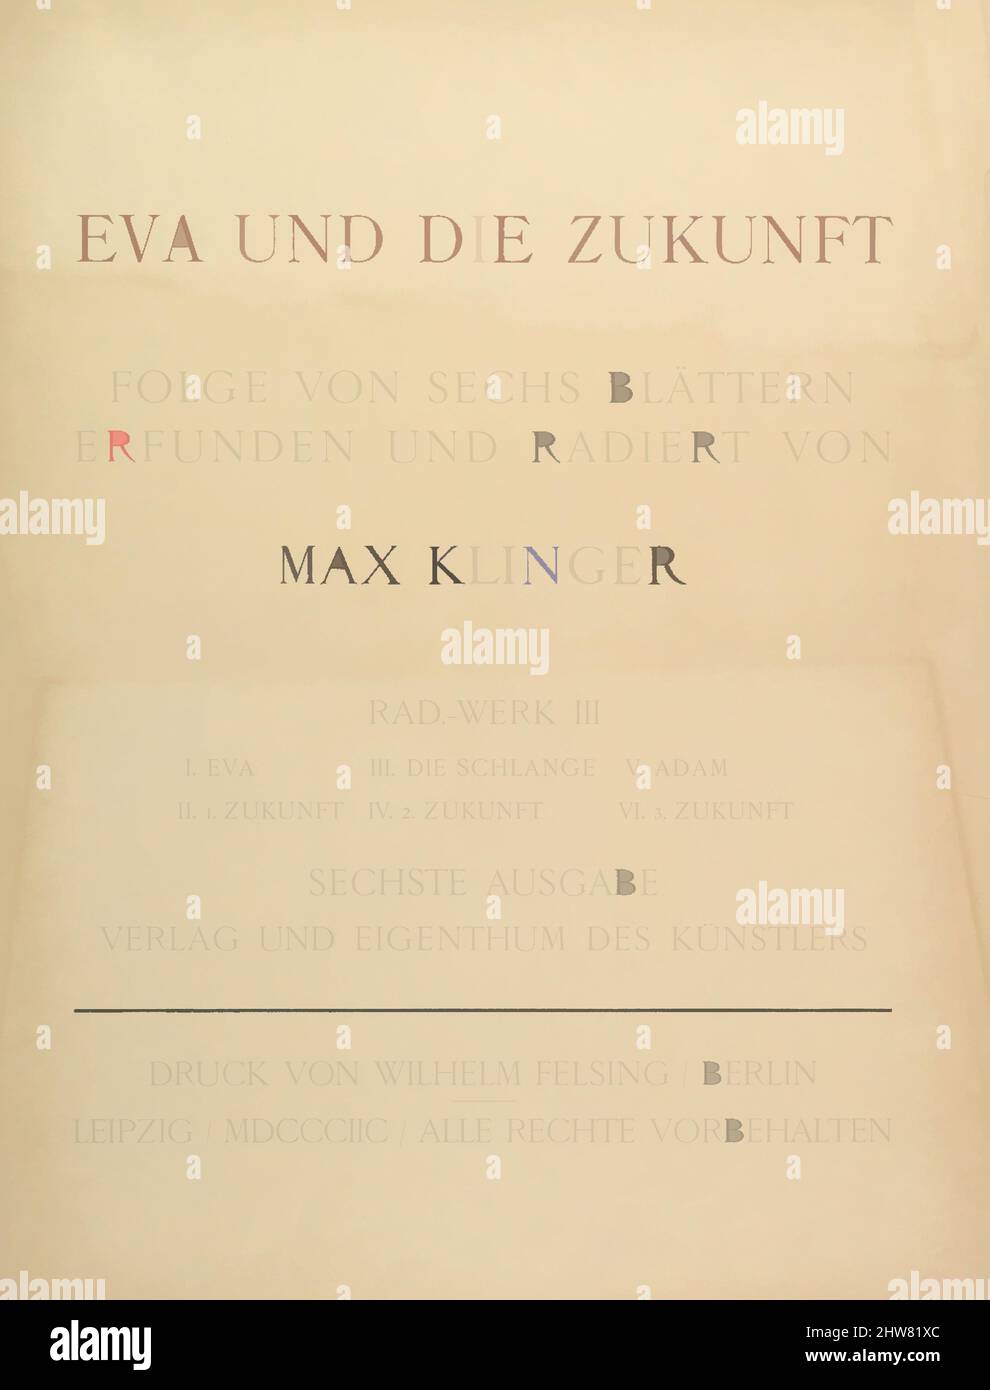 Art inspired by Title Page from Eva und die Zukunft (Rad.-Werk III), 1898, Etching, Sheet: 23 5/8 x 17 5/16 in. (60 x 44 cm), Prints, Max Klinger (German, Leipzig 1857–1920 Großjena, Classic works modernized by Artotop with a splash of modernity. Shapes, color and value, eye-catching visual impact on art. Emotions through freedom of artworks in a contemporary way. A timeless message pursuing a wildly creative new direction. Artists turning to the digital medium and creating the Artotop NFT Stock Photo